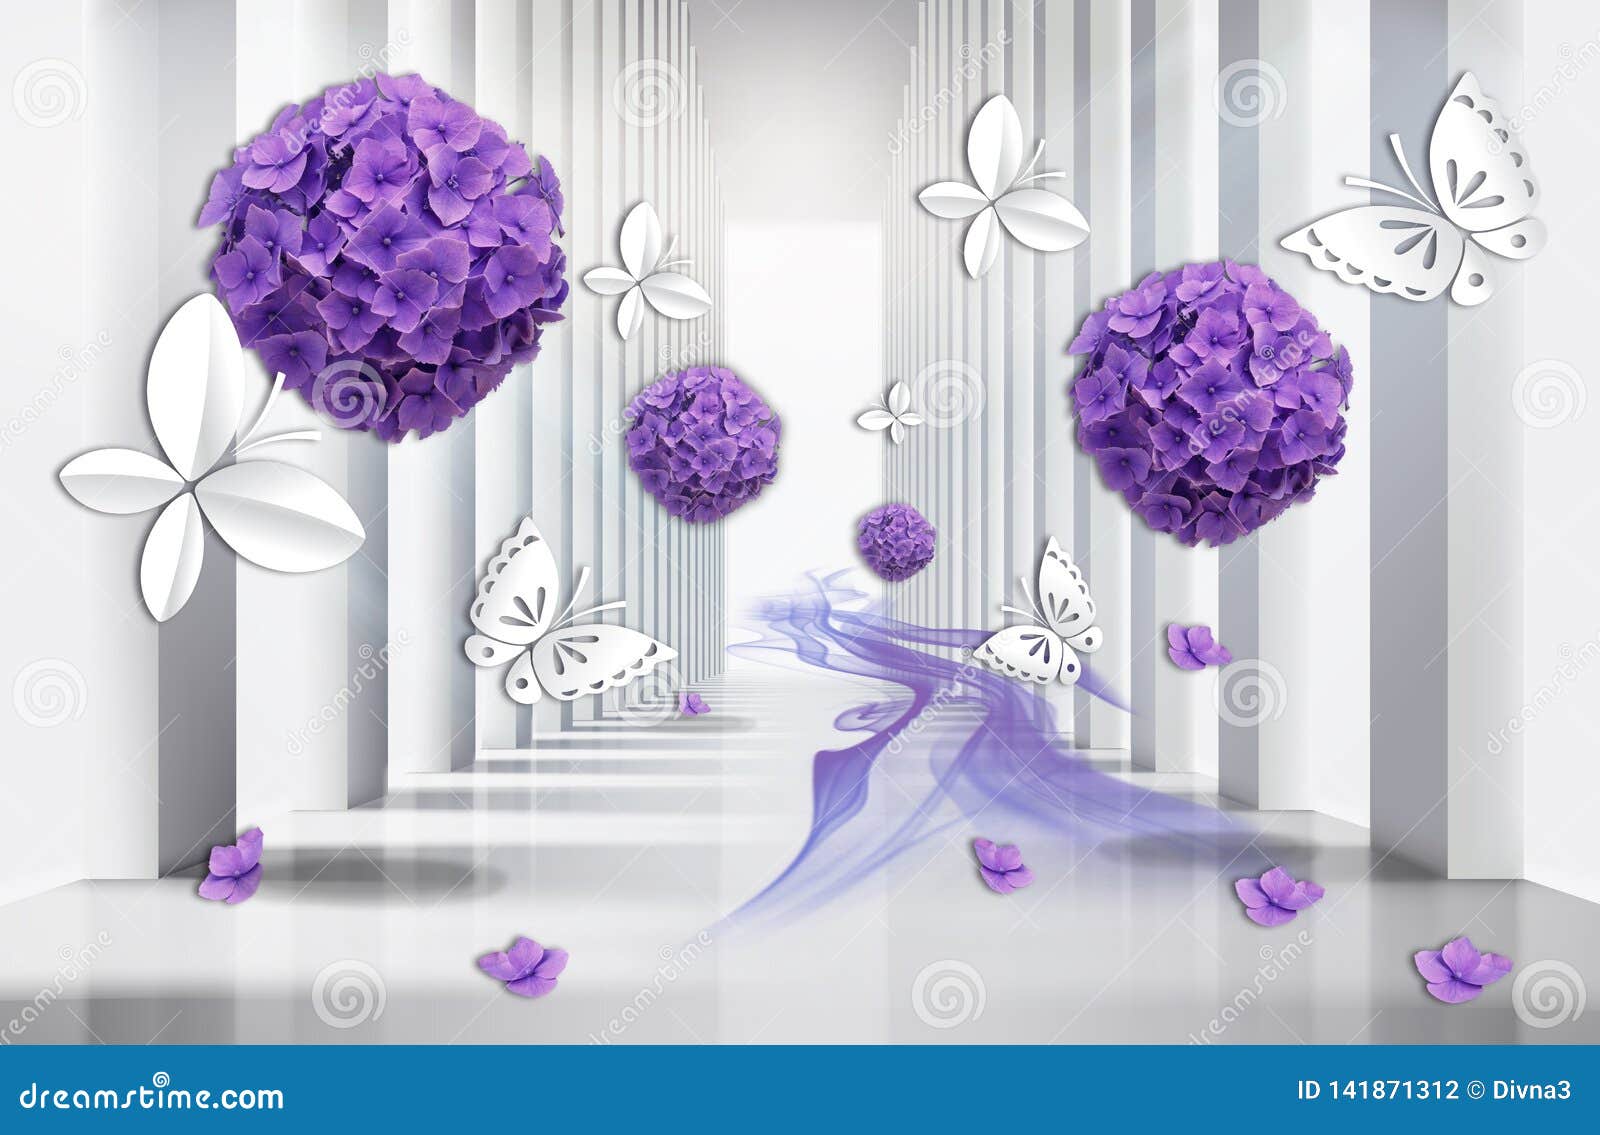 3d Wallpaper Architecture Tunnel With Purple Hydrangea Flowers